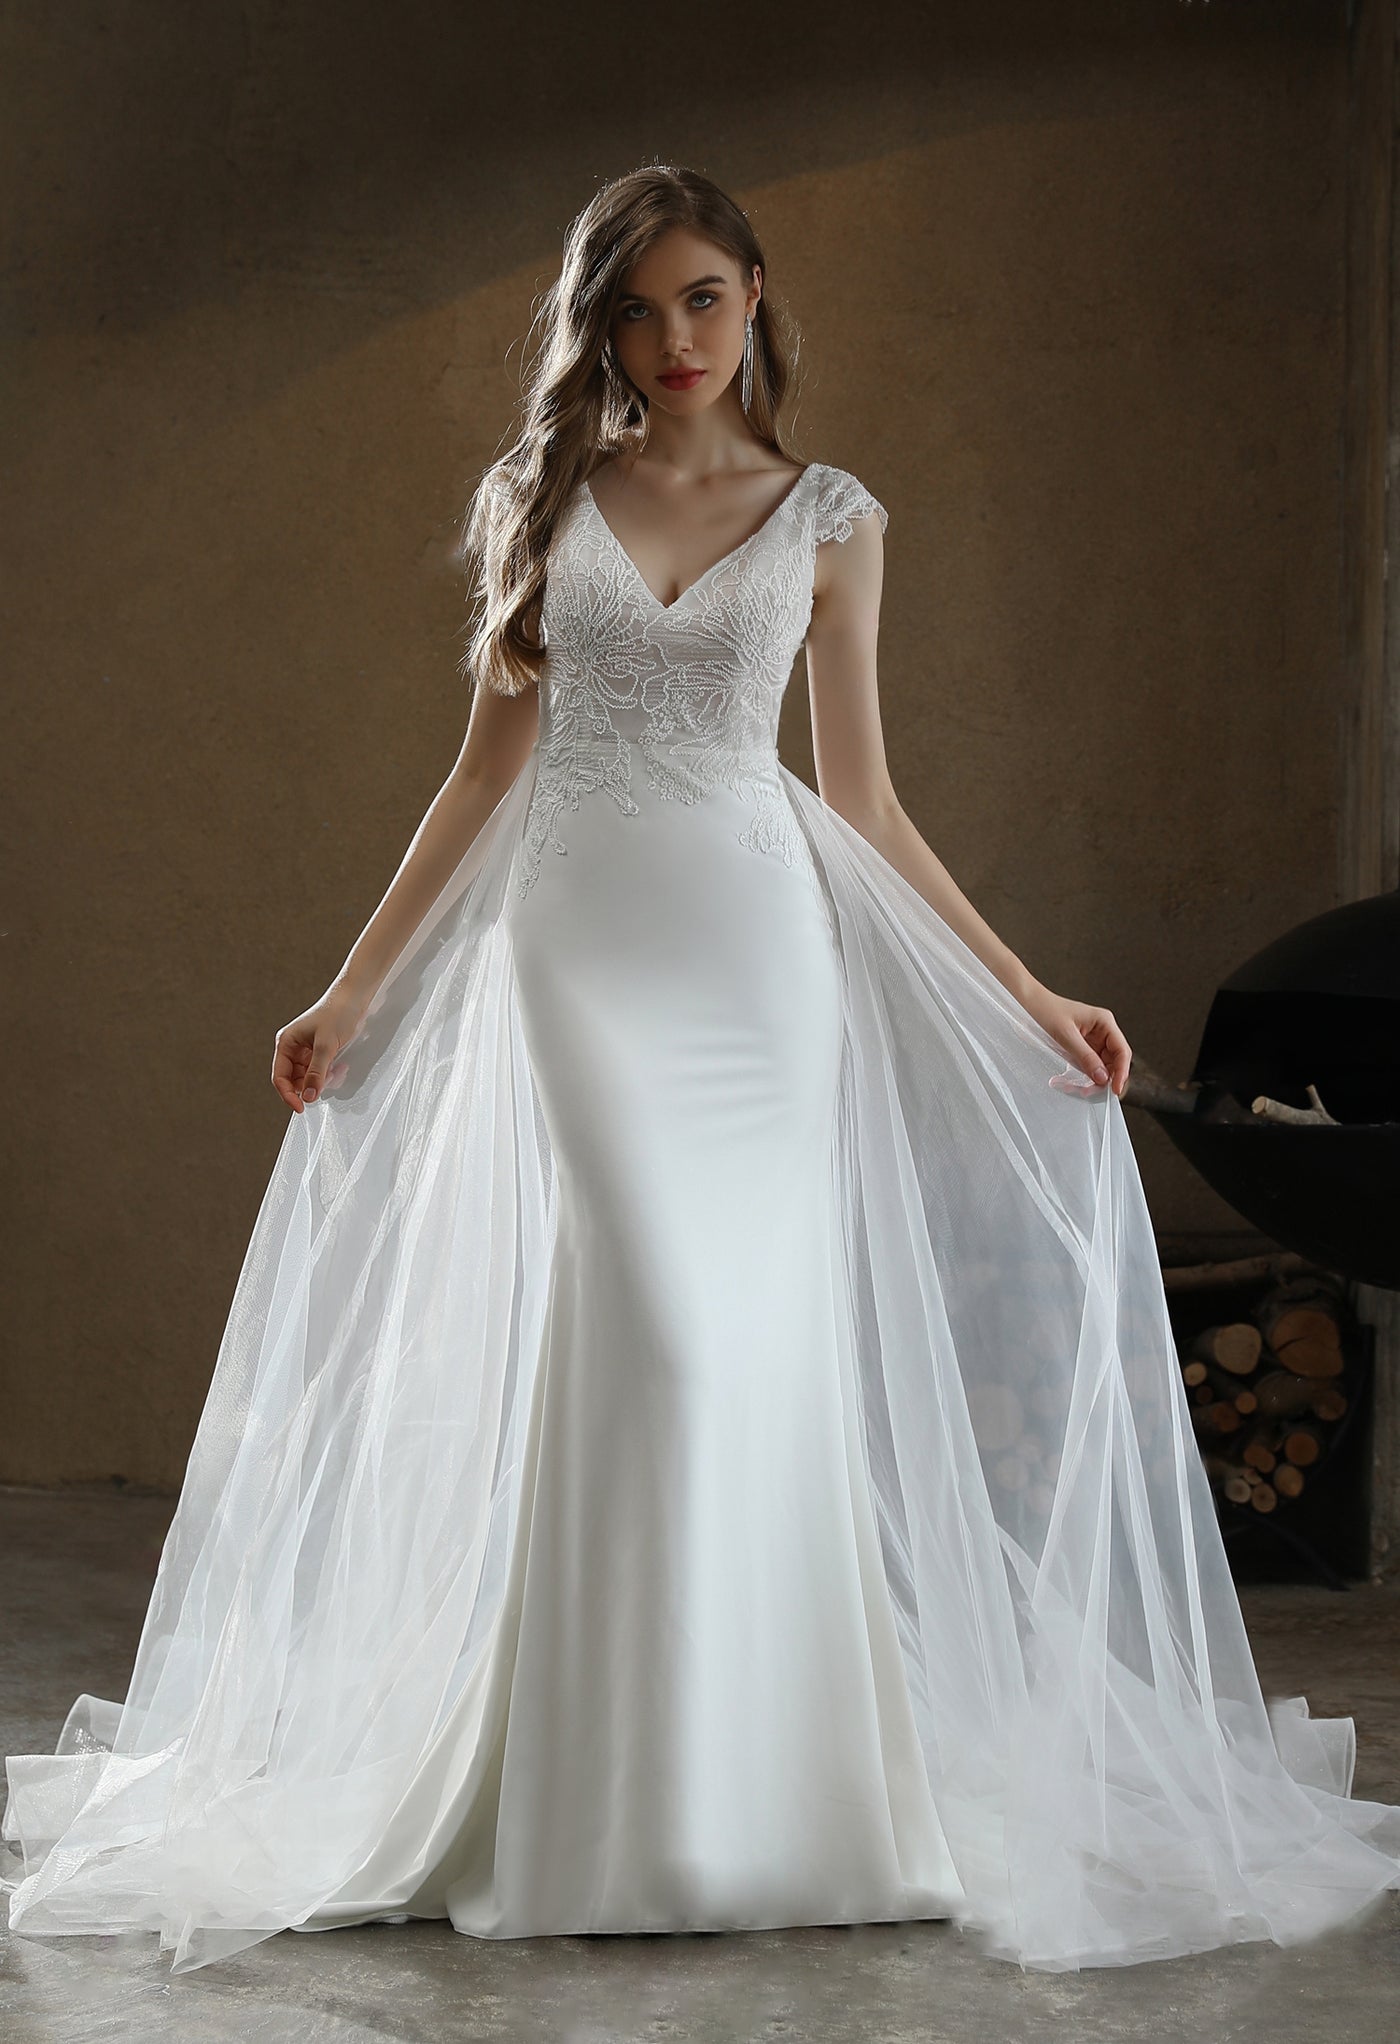 Crepe Sheath Wedding Dress with Lace Cap Sleeves with Detachable Train